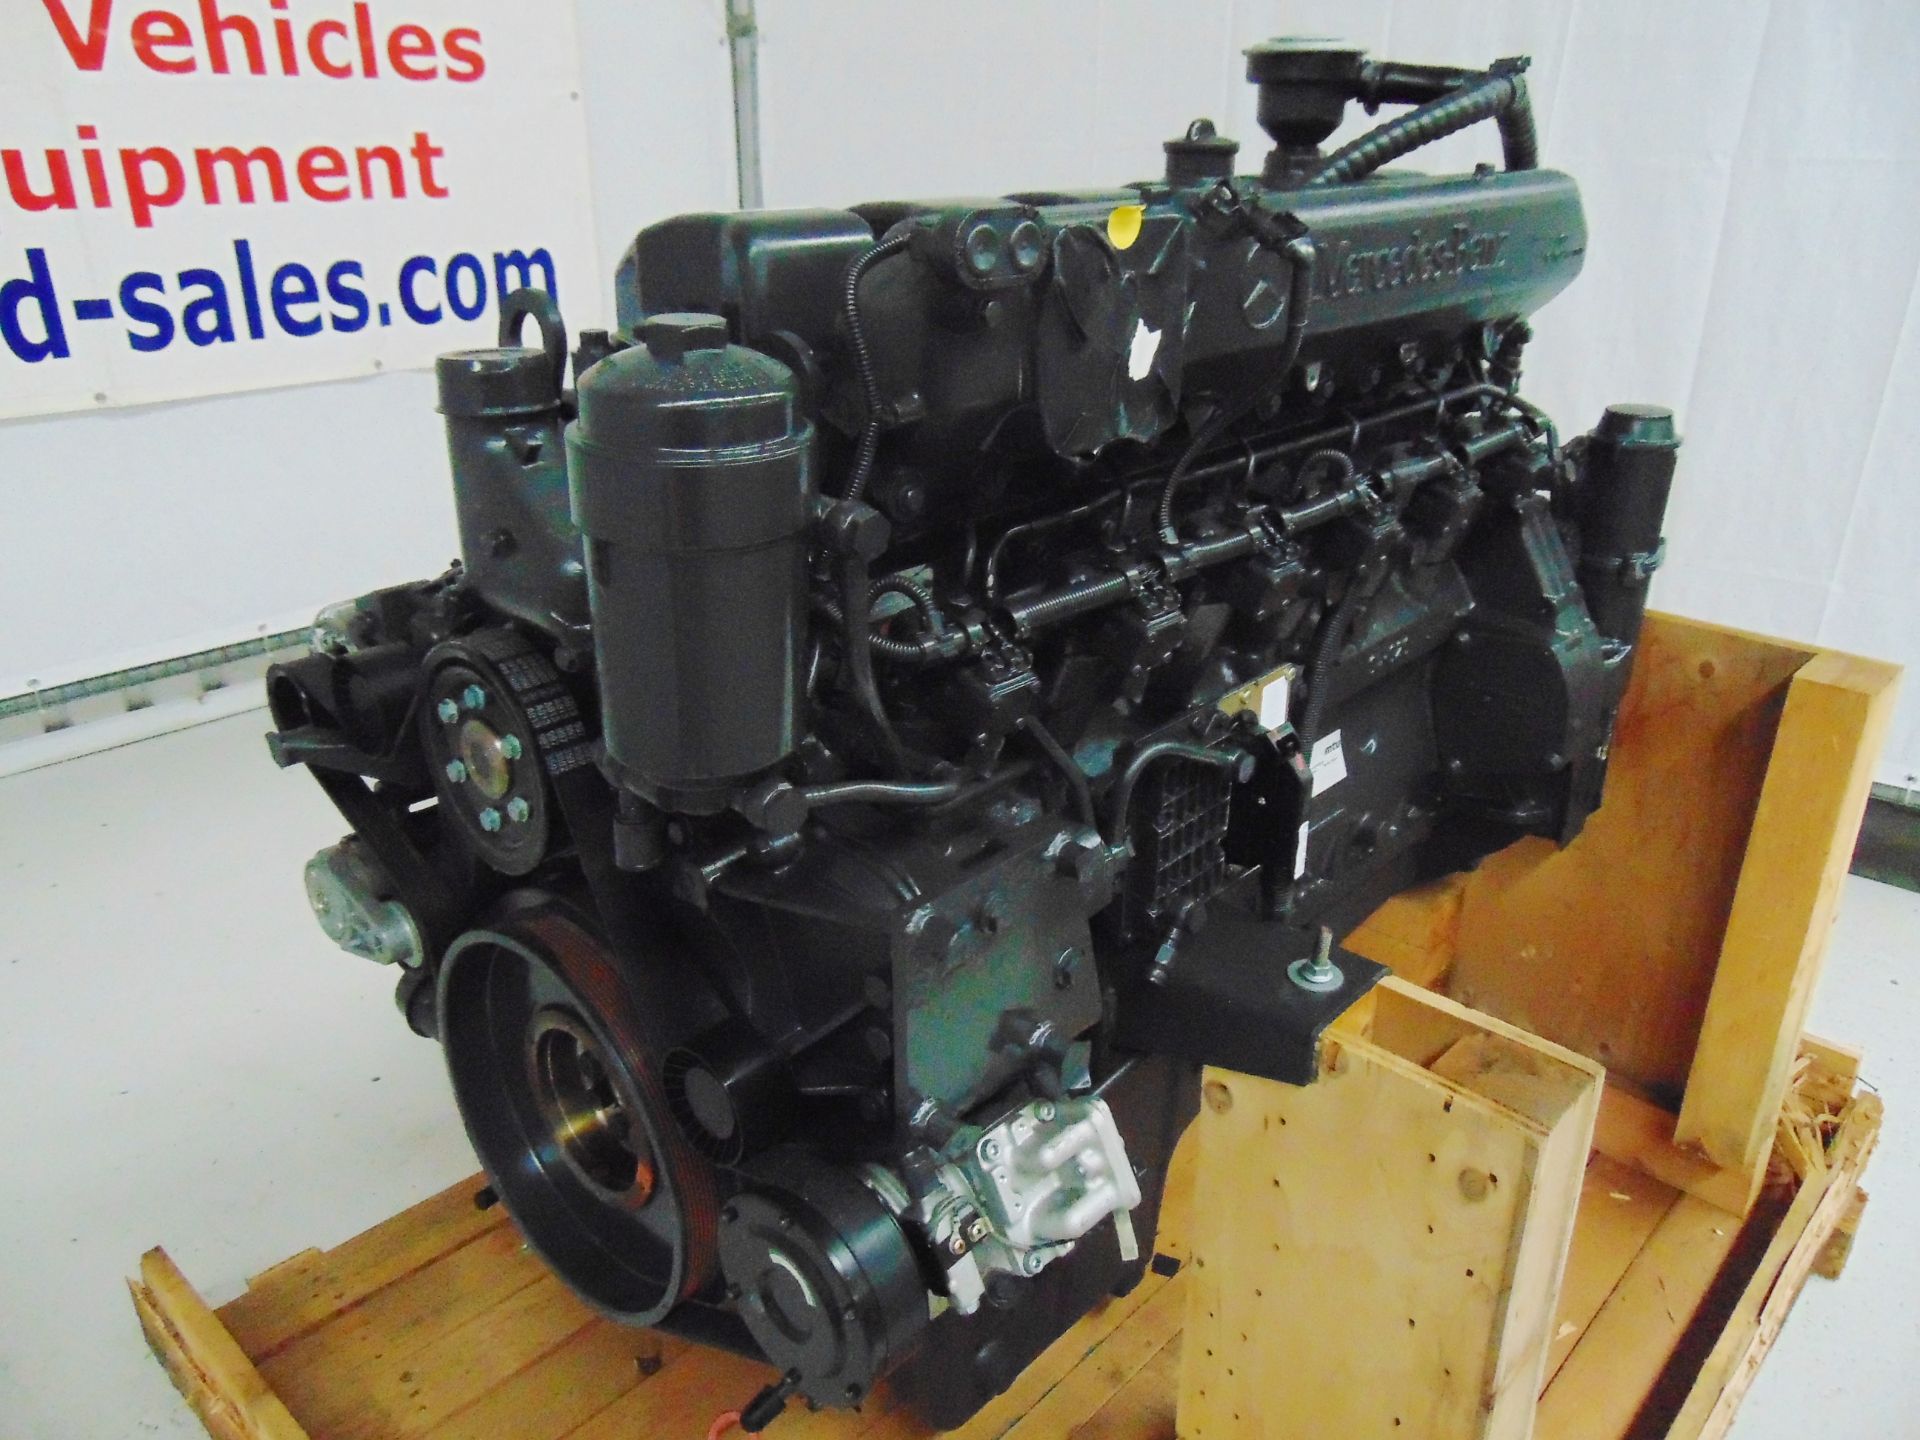 Factory Reconditioned Mercedes-Benz OM457LA Turbo Diesel Engine - Image 20 of 23